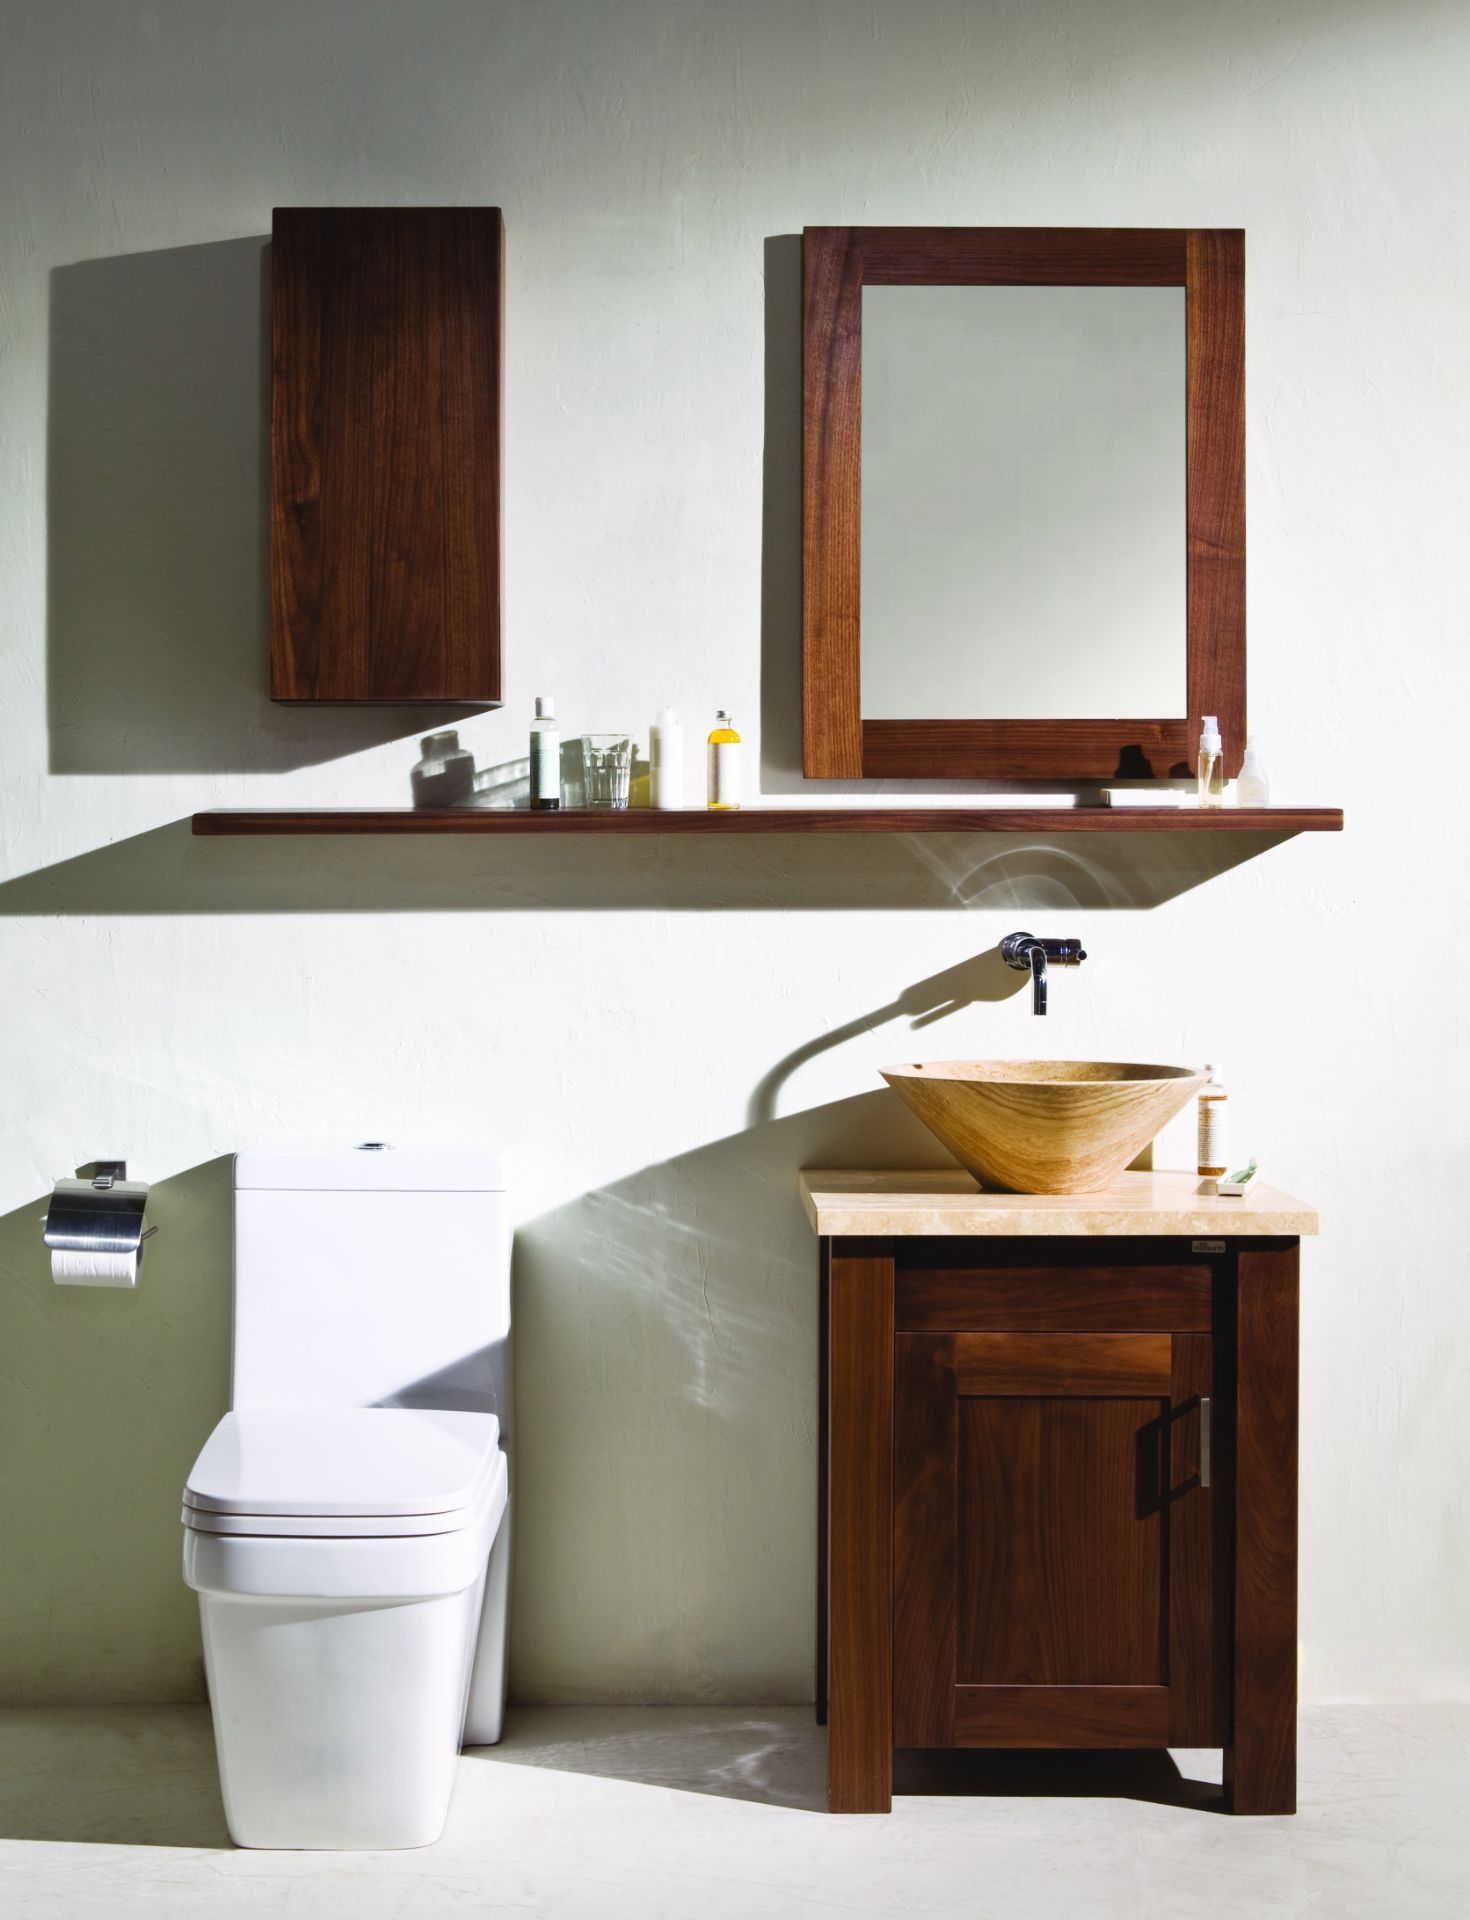 1 x Stonearth Bathroom Storage Shelf With Concealed Brackets - American Solid Walnut - Size: 600mm - Image 6 of 16